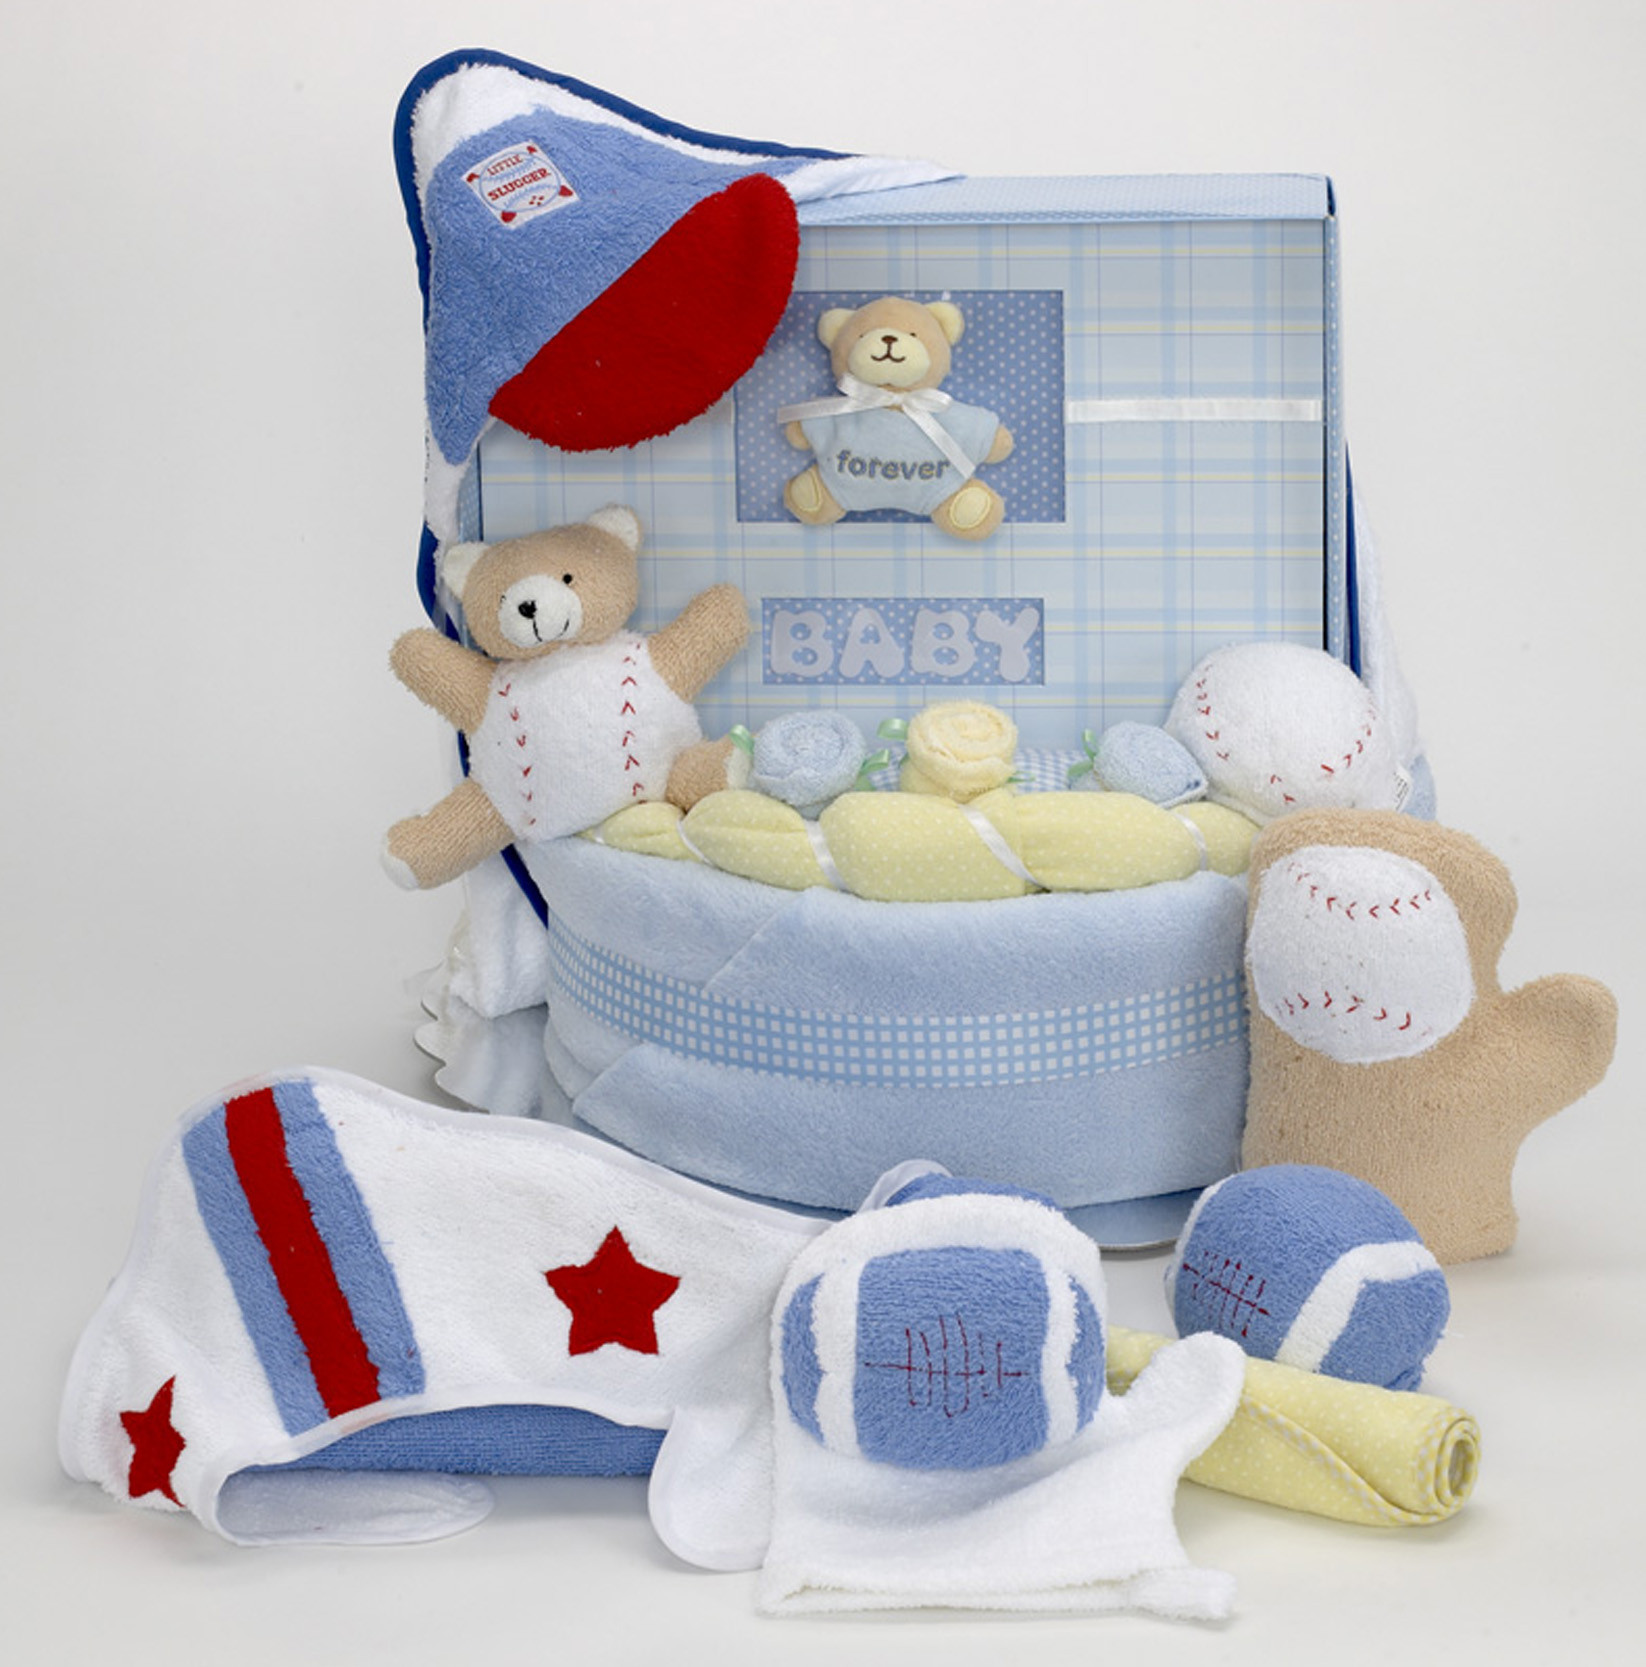 Top Baby Boy Gifts
 5 Best Baby Boy Gifts News from Silly Phillie